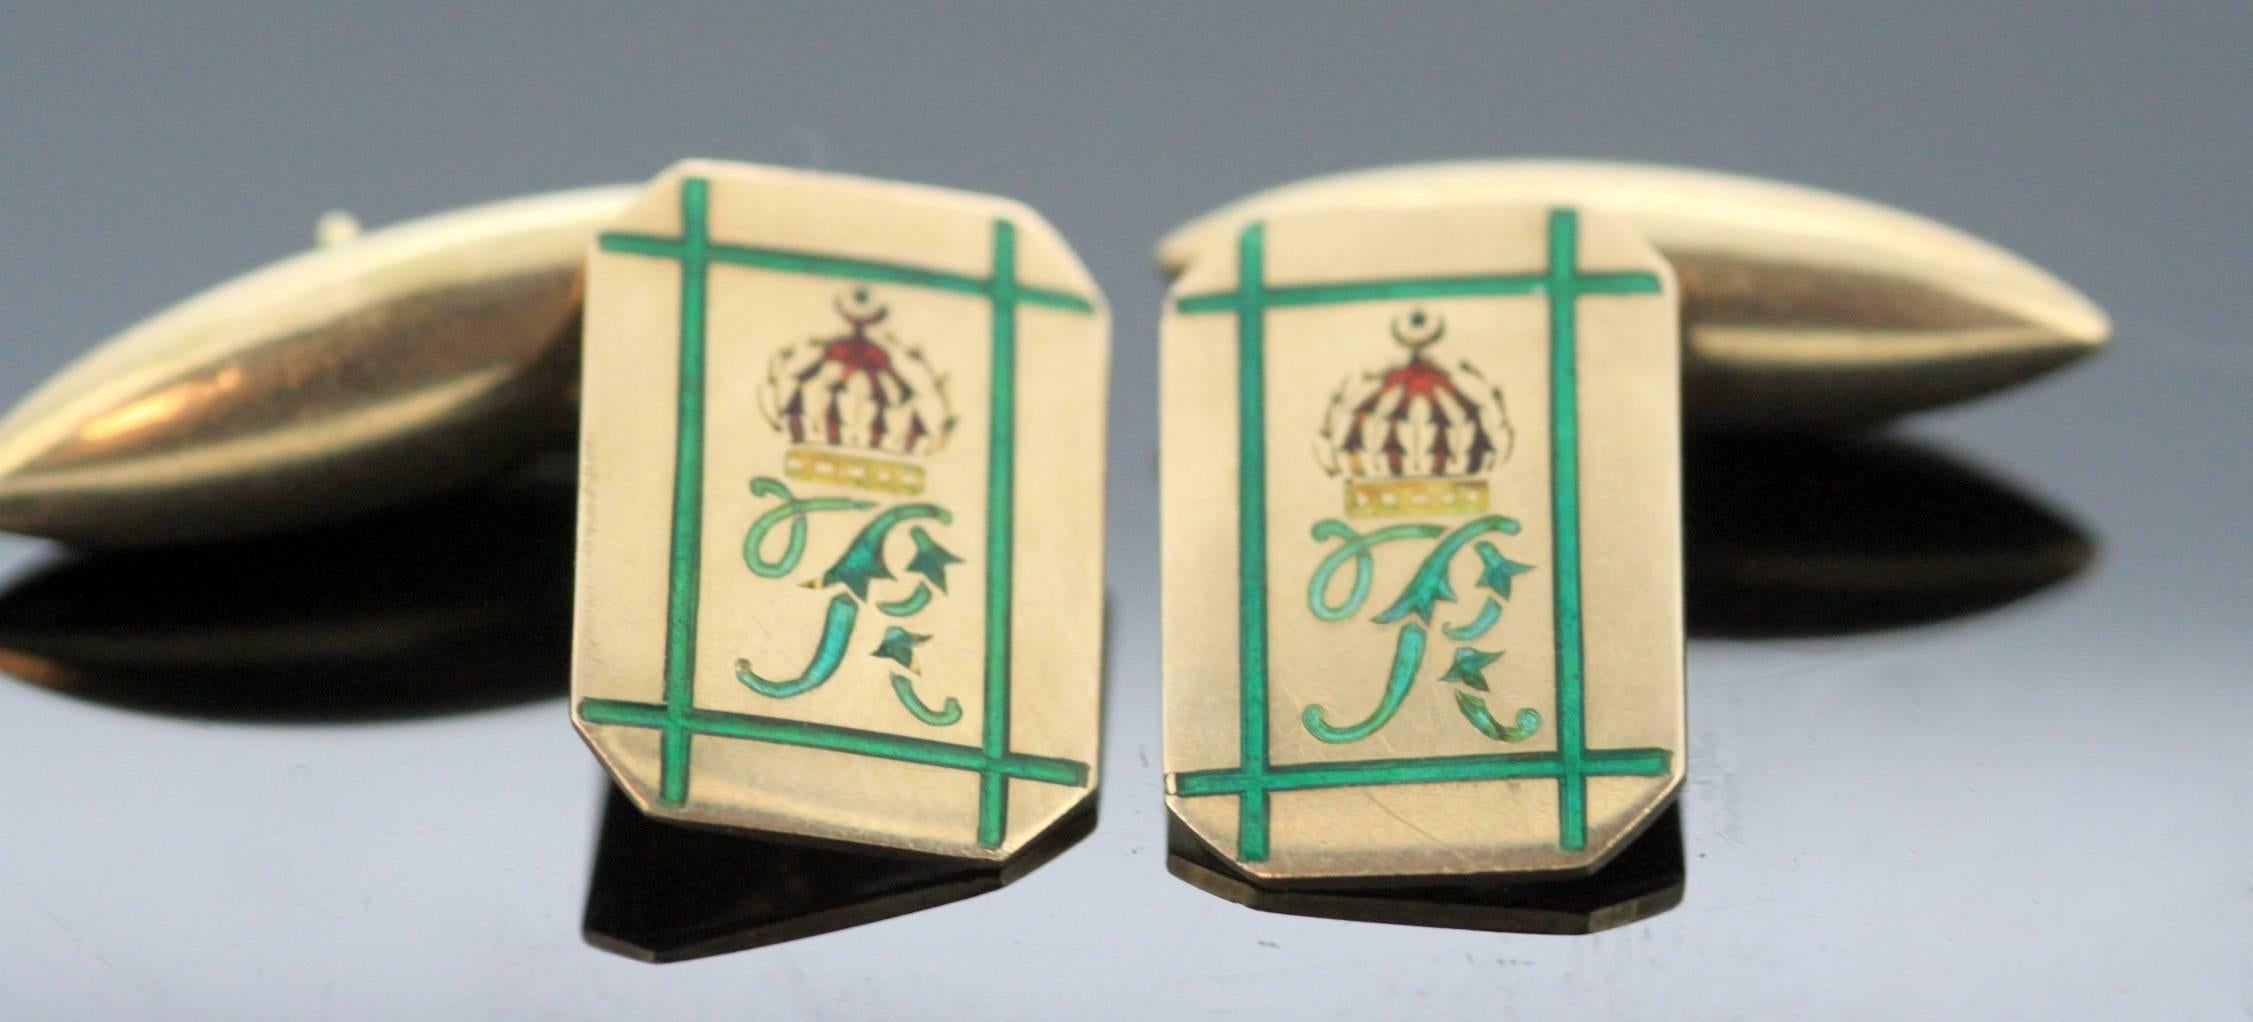 Vintage Royal 9K Yellow Gold and Enamel Cufflinks with initials R. 
Designer : Mappin & Webb 
Circa.1970's 
Fully hallmarked. 

Dimensions - 
Size : 3 x 2 x 1.05 cm 
Weight : 5 grams total 

Condition : General signs of usage, has some minor